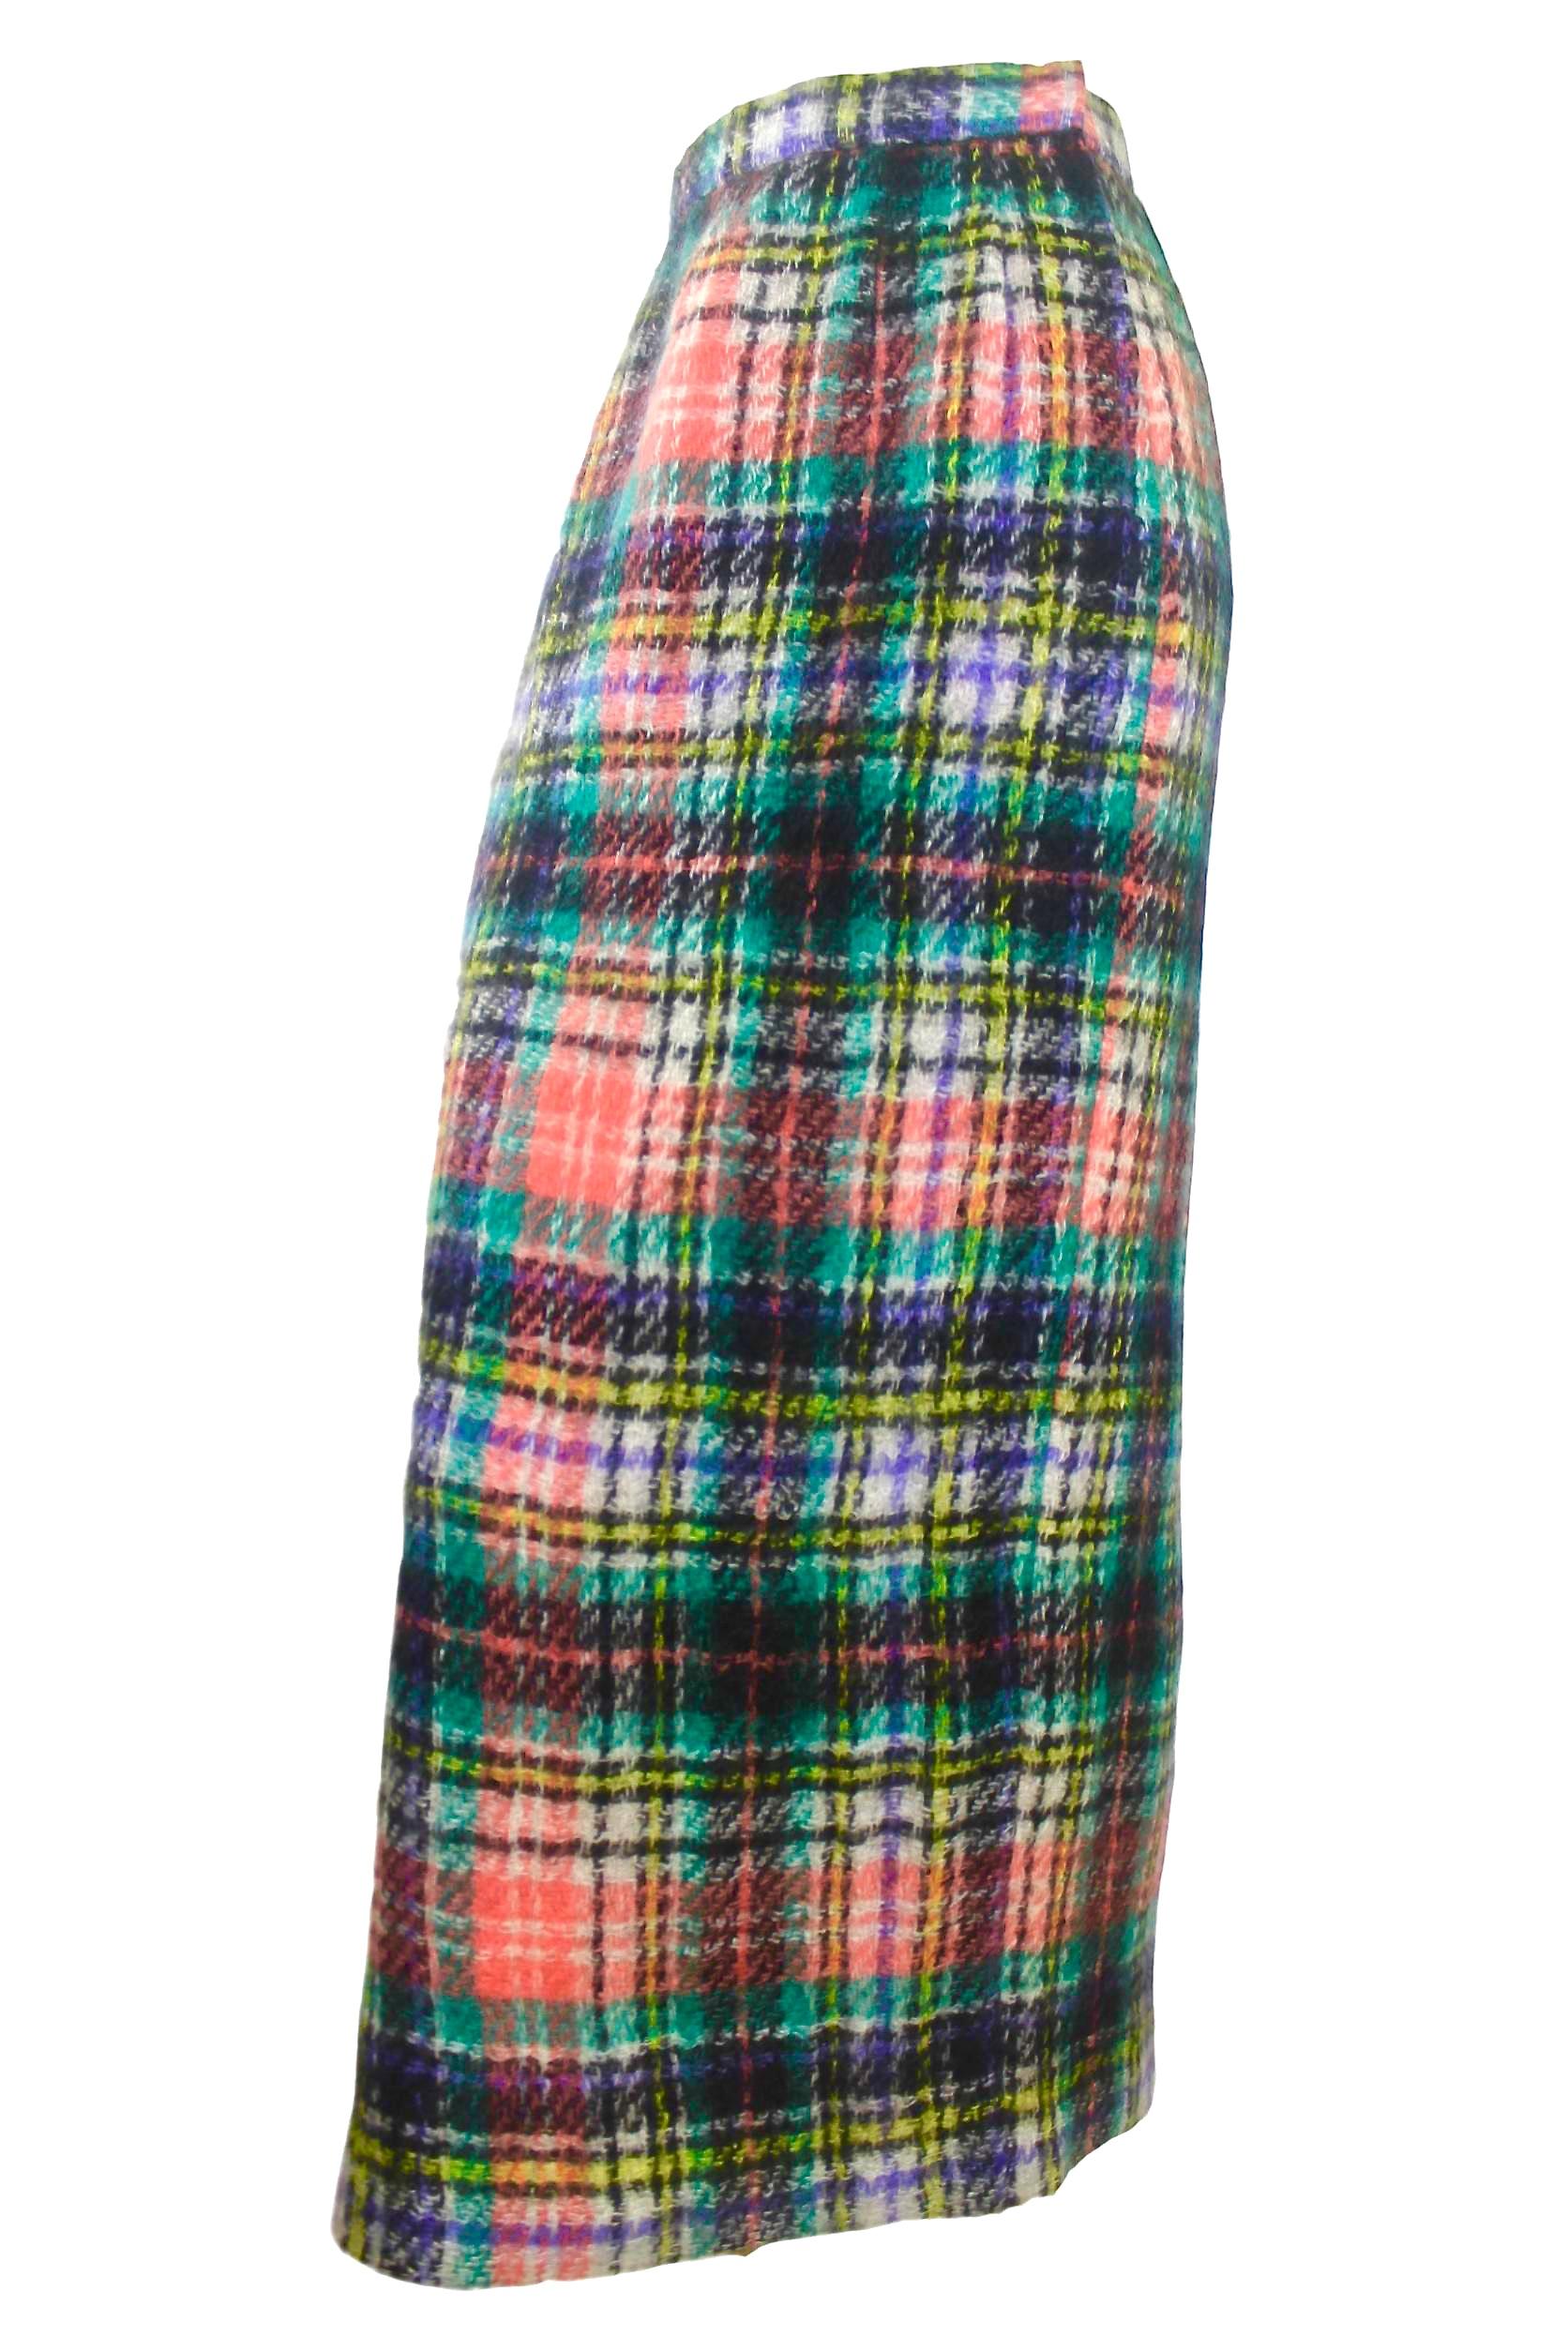 Junya Watanabe Comme des Garcons
1999 Collection
Plaid Mohair Skirt
Labelled size S